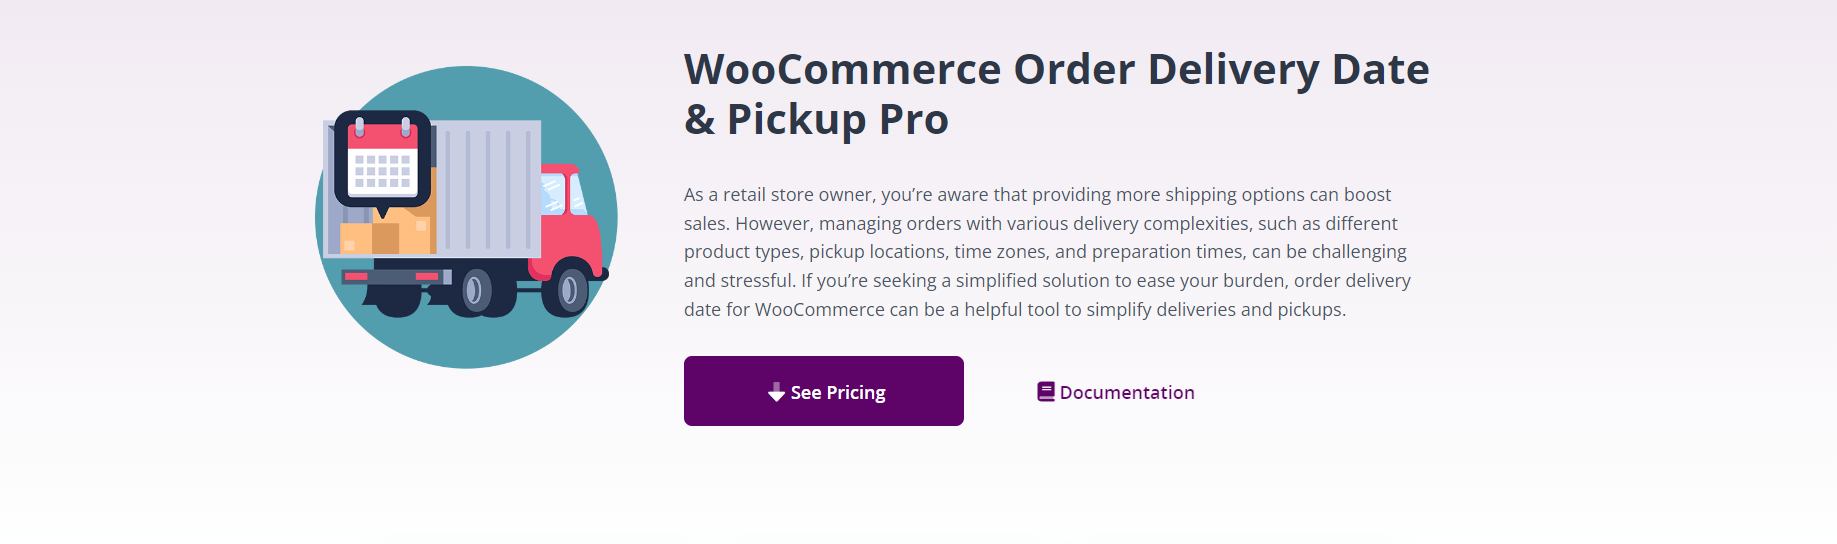 WooCommerce Order Delivery Date & Pickup Pro